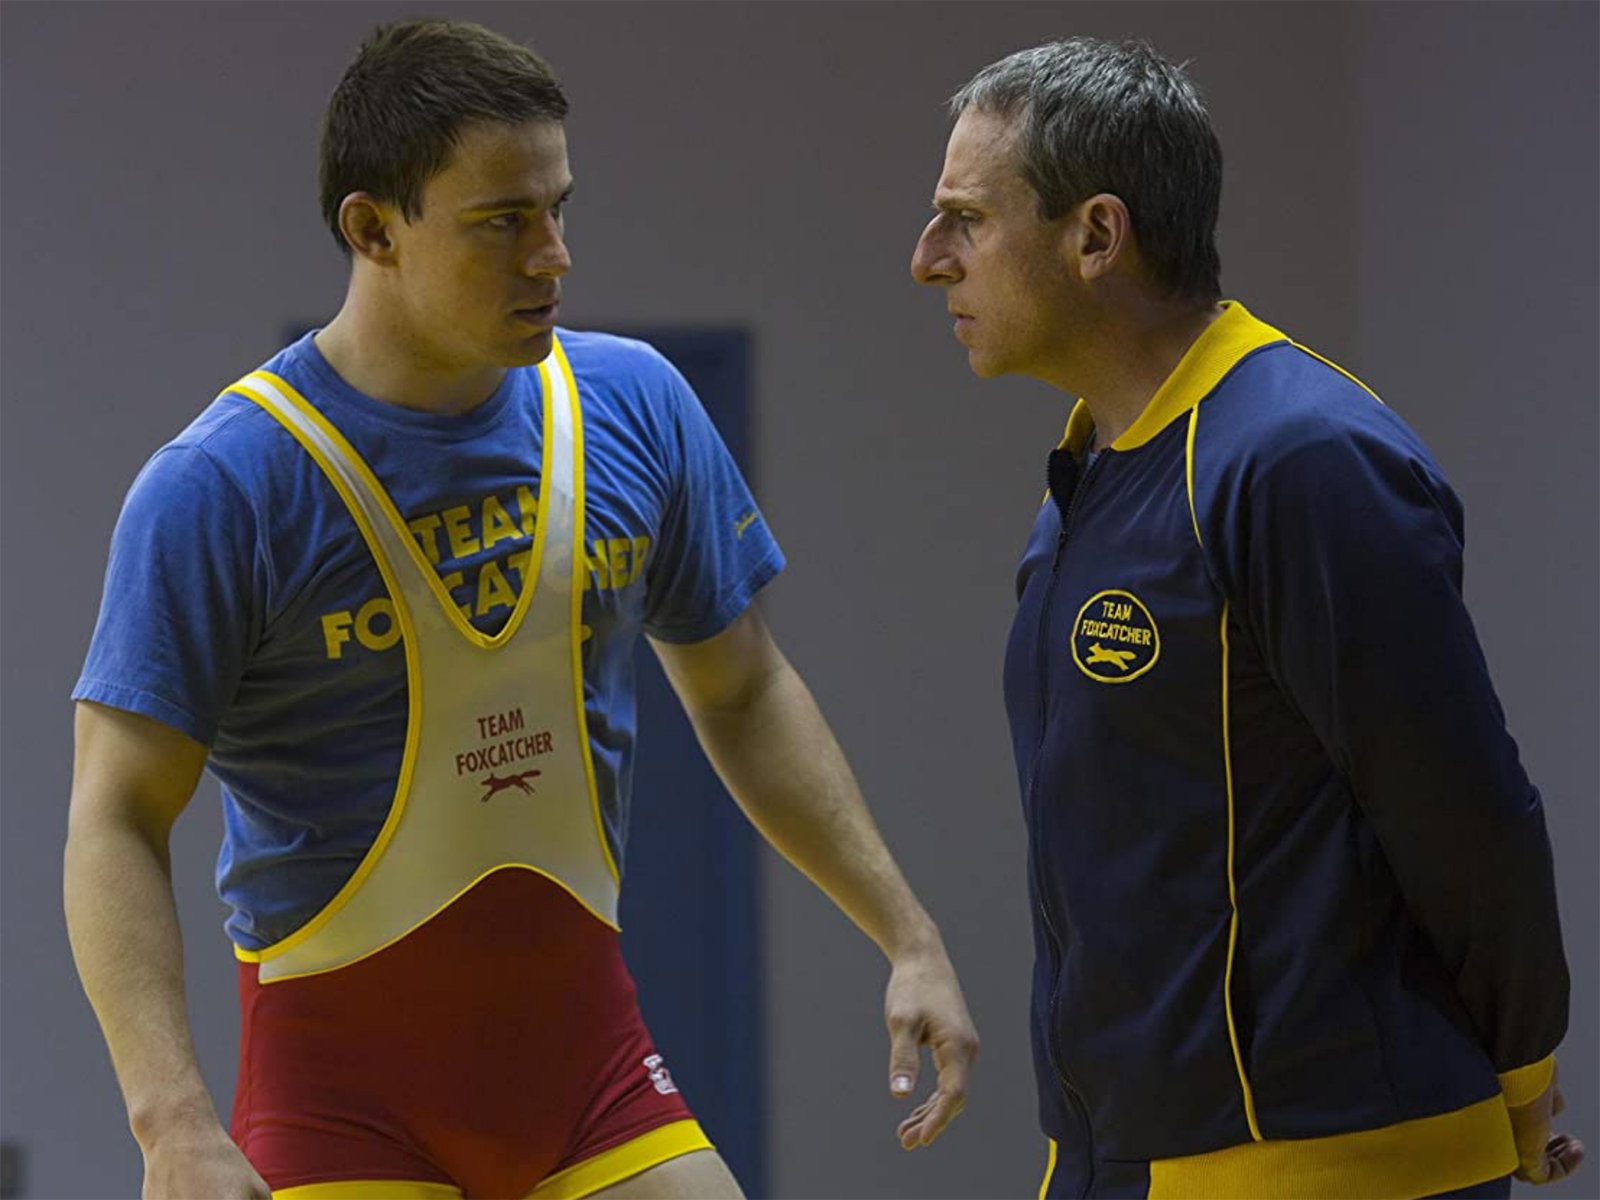 Channing Tatum and Steve Carell in “Foxcatcher” (2014)